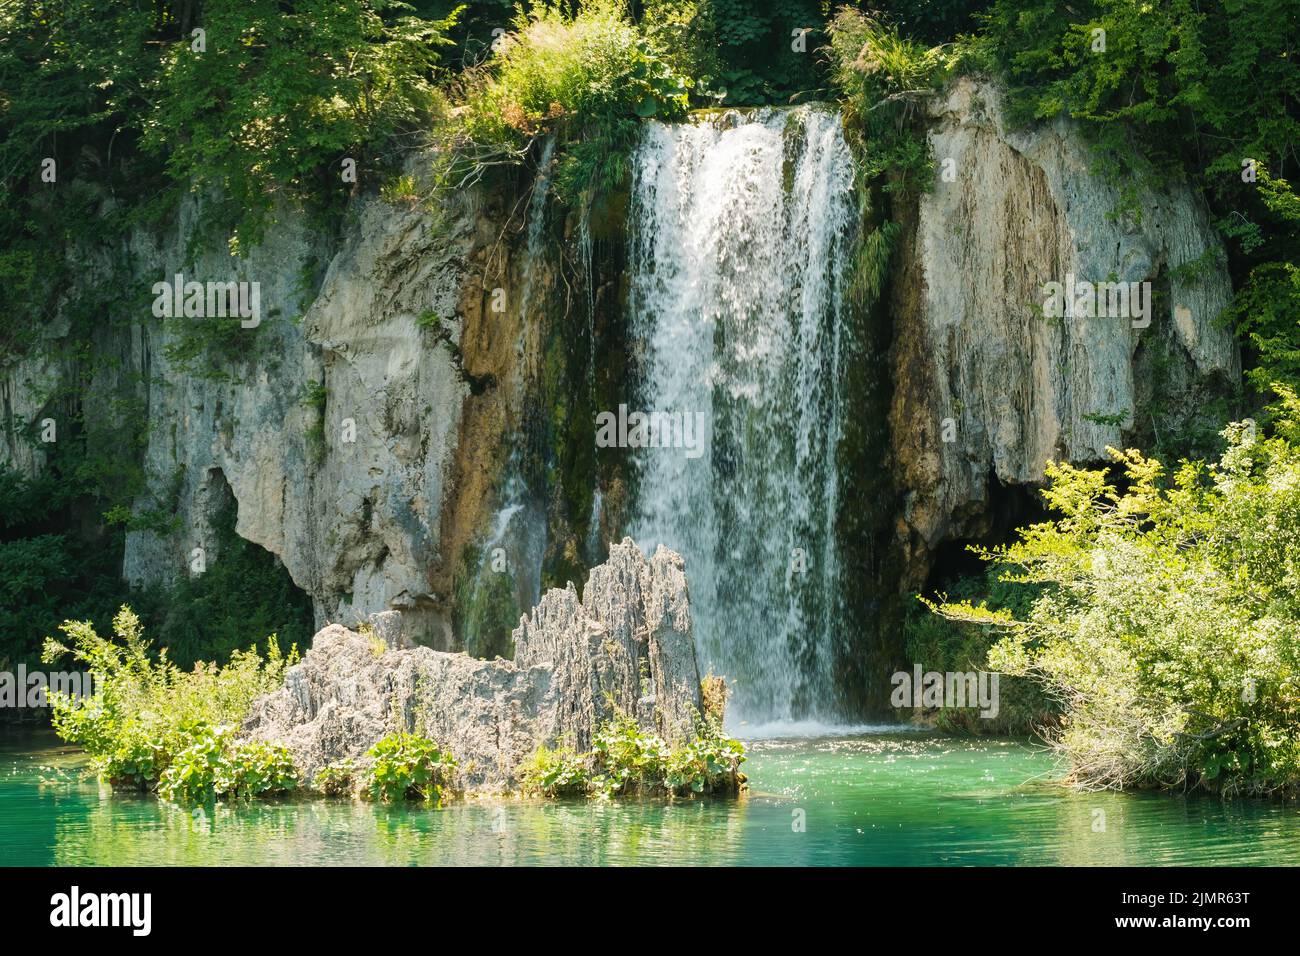 Waterfall flows down from rocky cliff into clear turquoise water at sunlight. Breathtaking view of aquamarine cascade in national park on Plitvice lakes Stock Photo